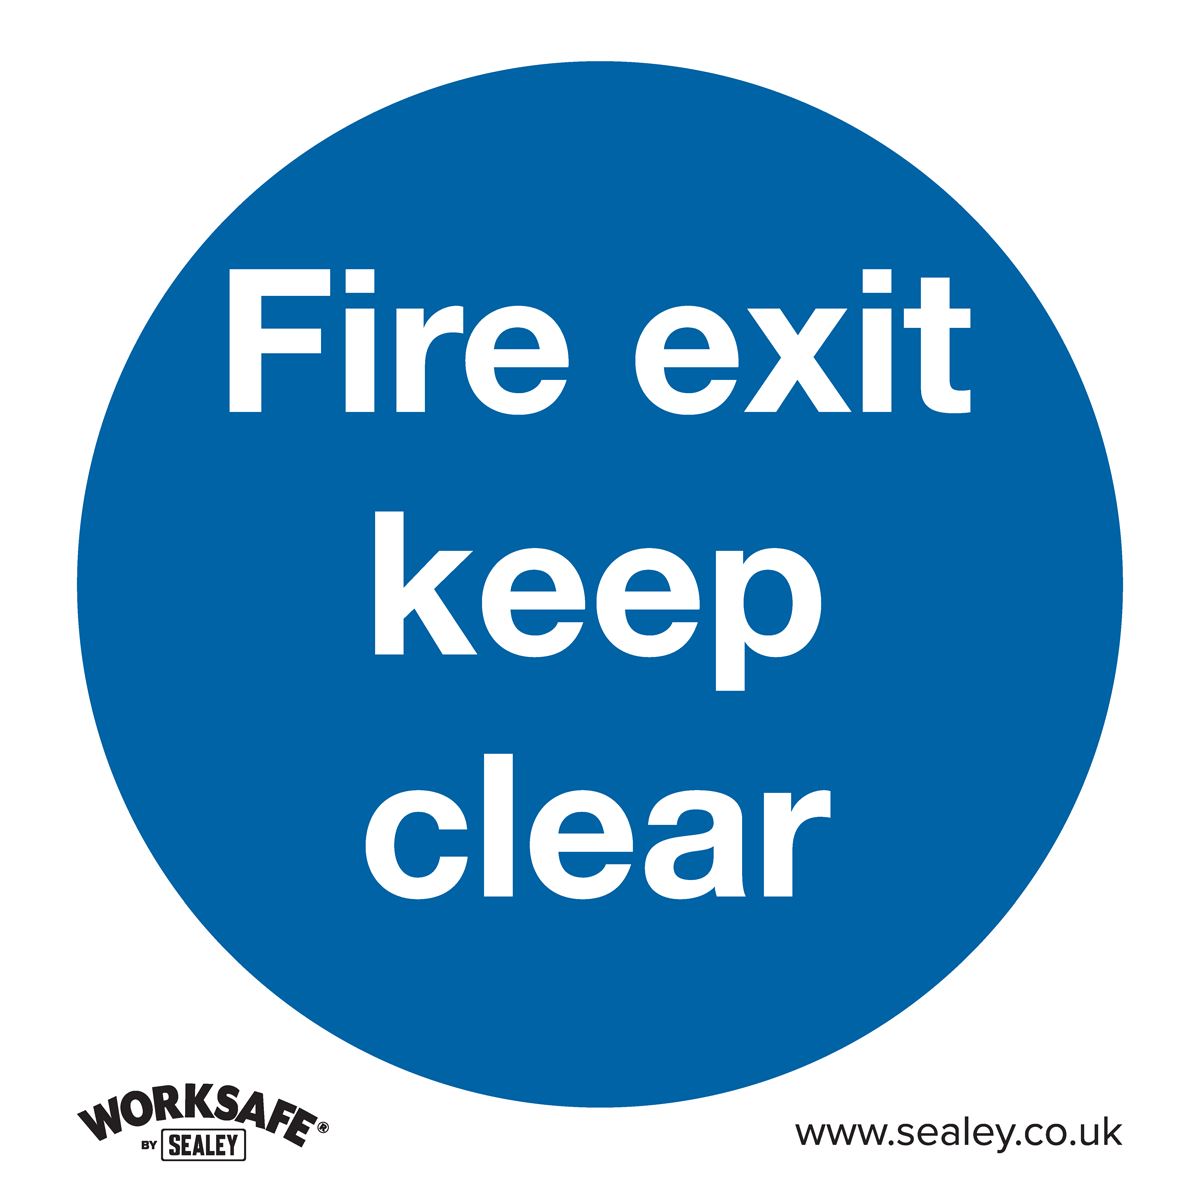 Worksafe by Sealey Mandatory Safety Sign - Fire Exit Keep Clear - Self-Adhesive Vinyl